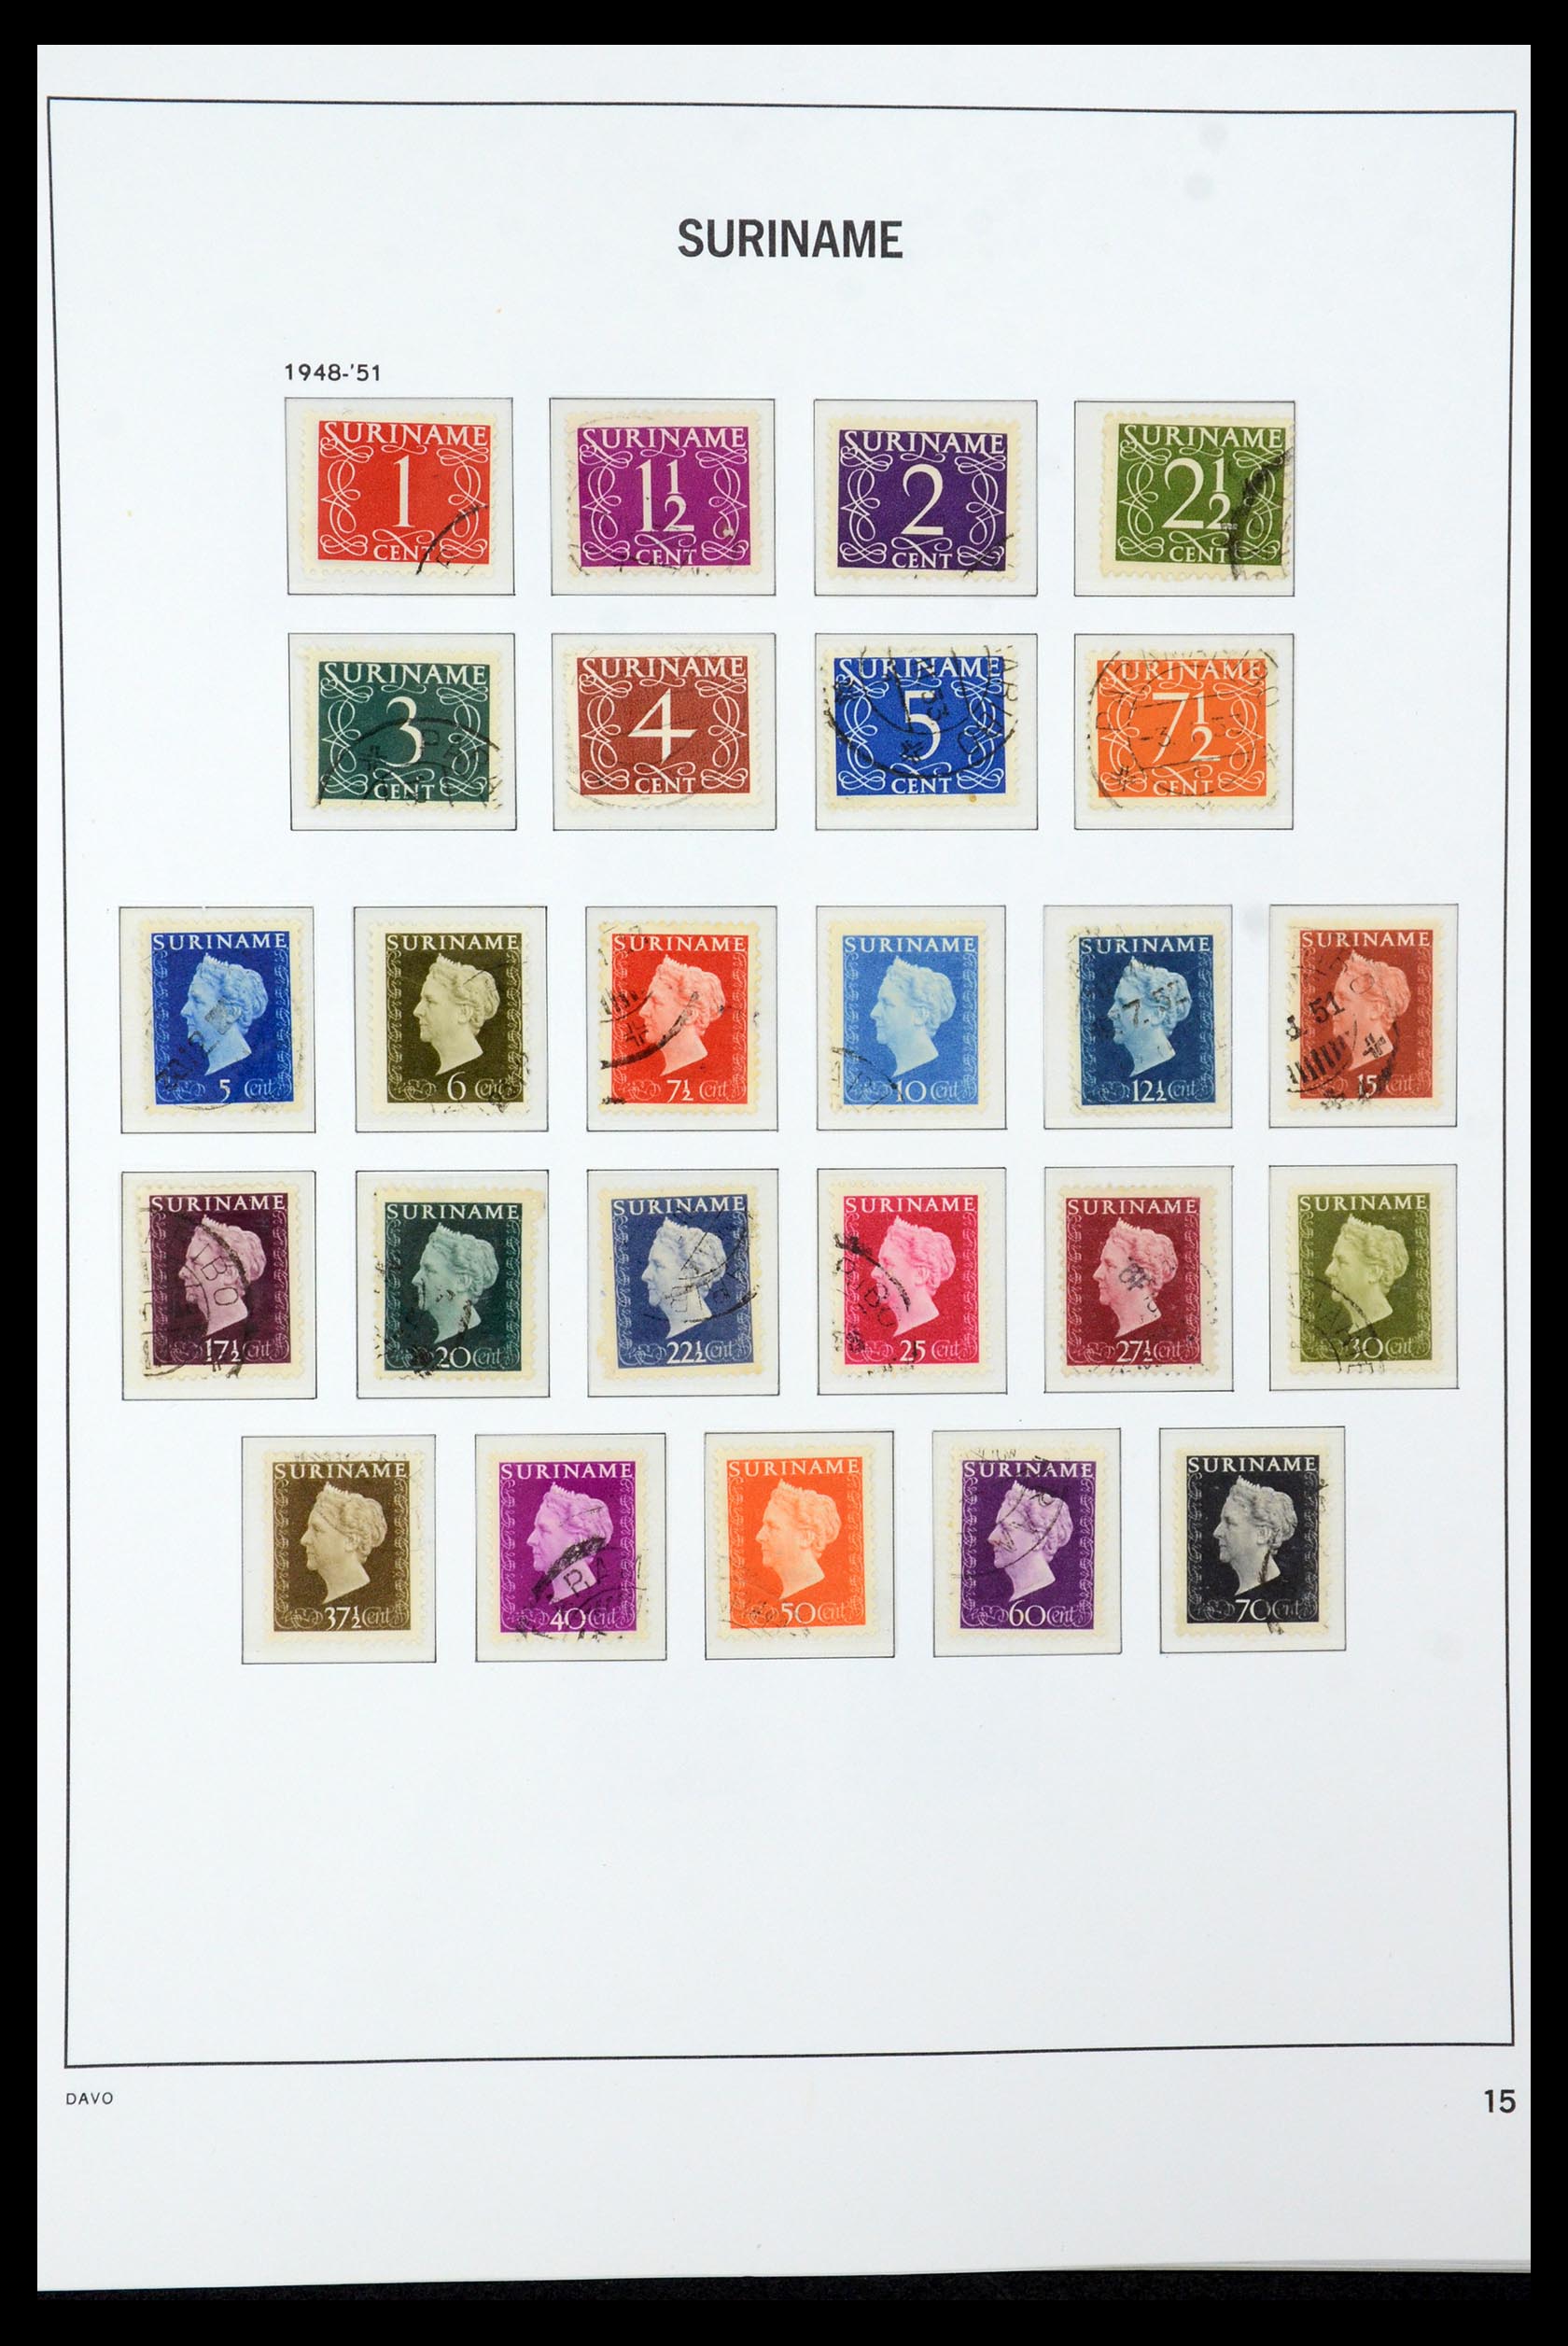 36422 015 - Stamp collection 36422 Suriname 1873-1975.